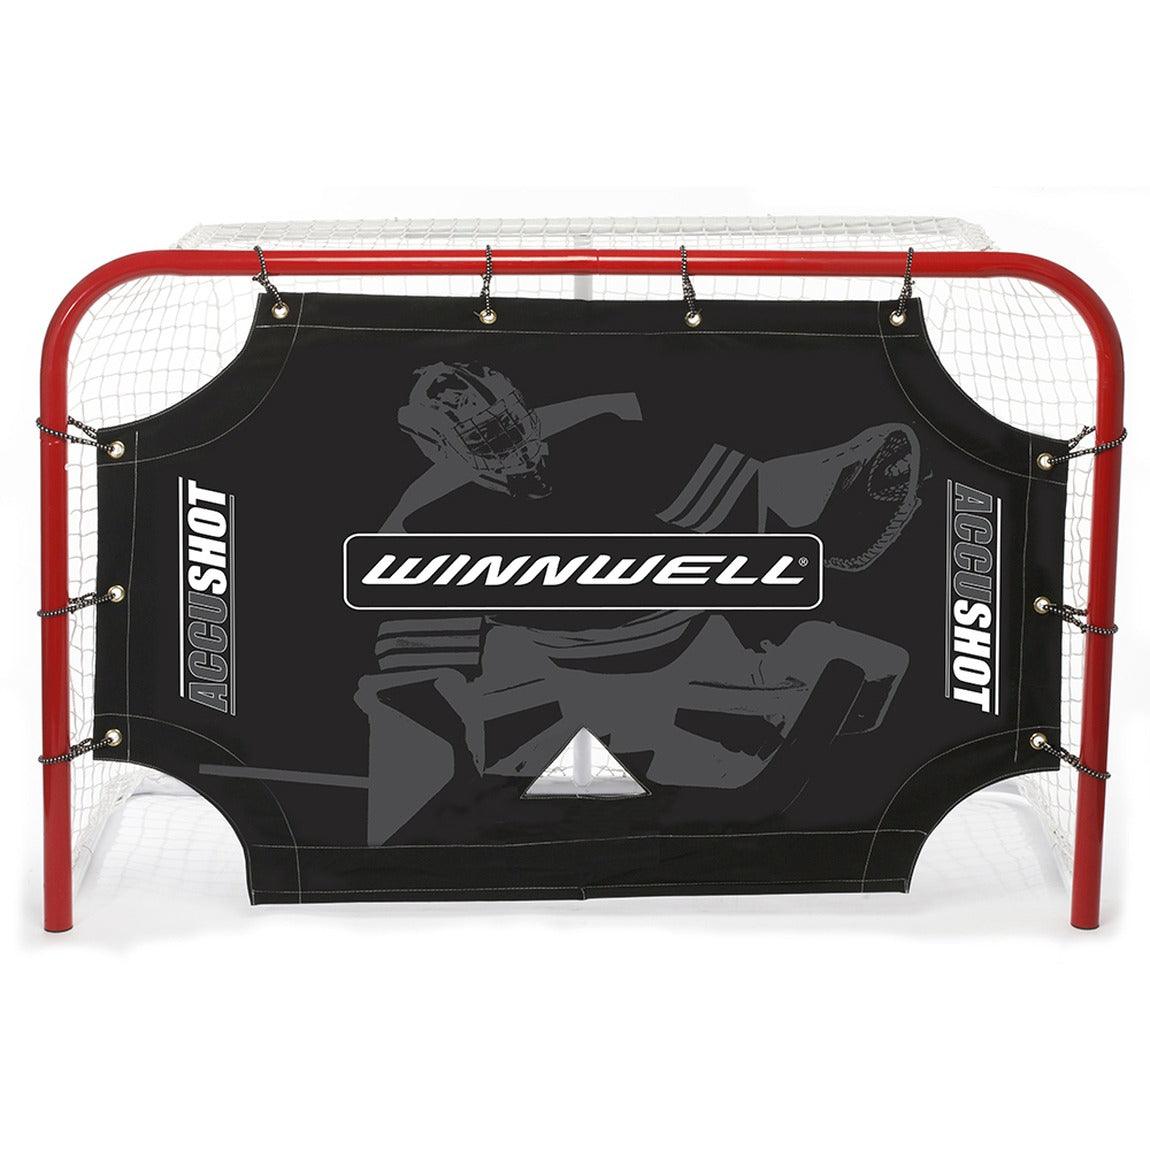 Hockey Shooting Target Accushot 60" - Sports Excellence